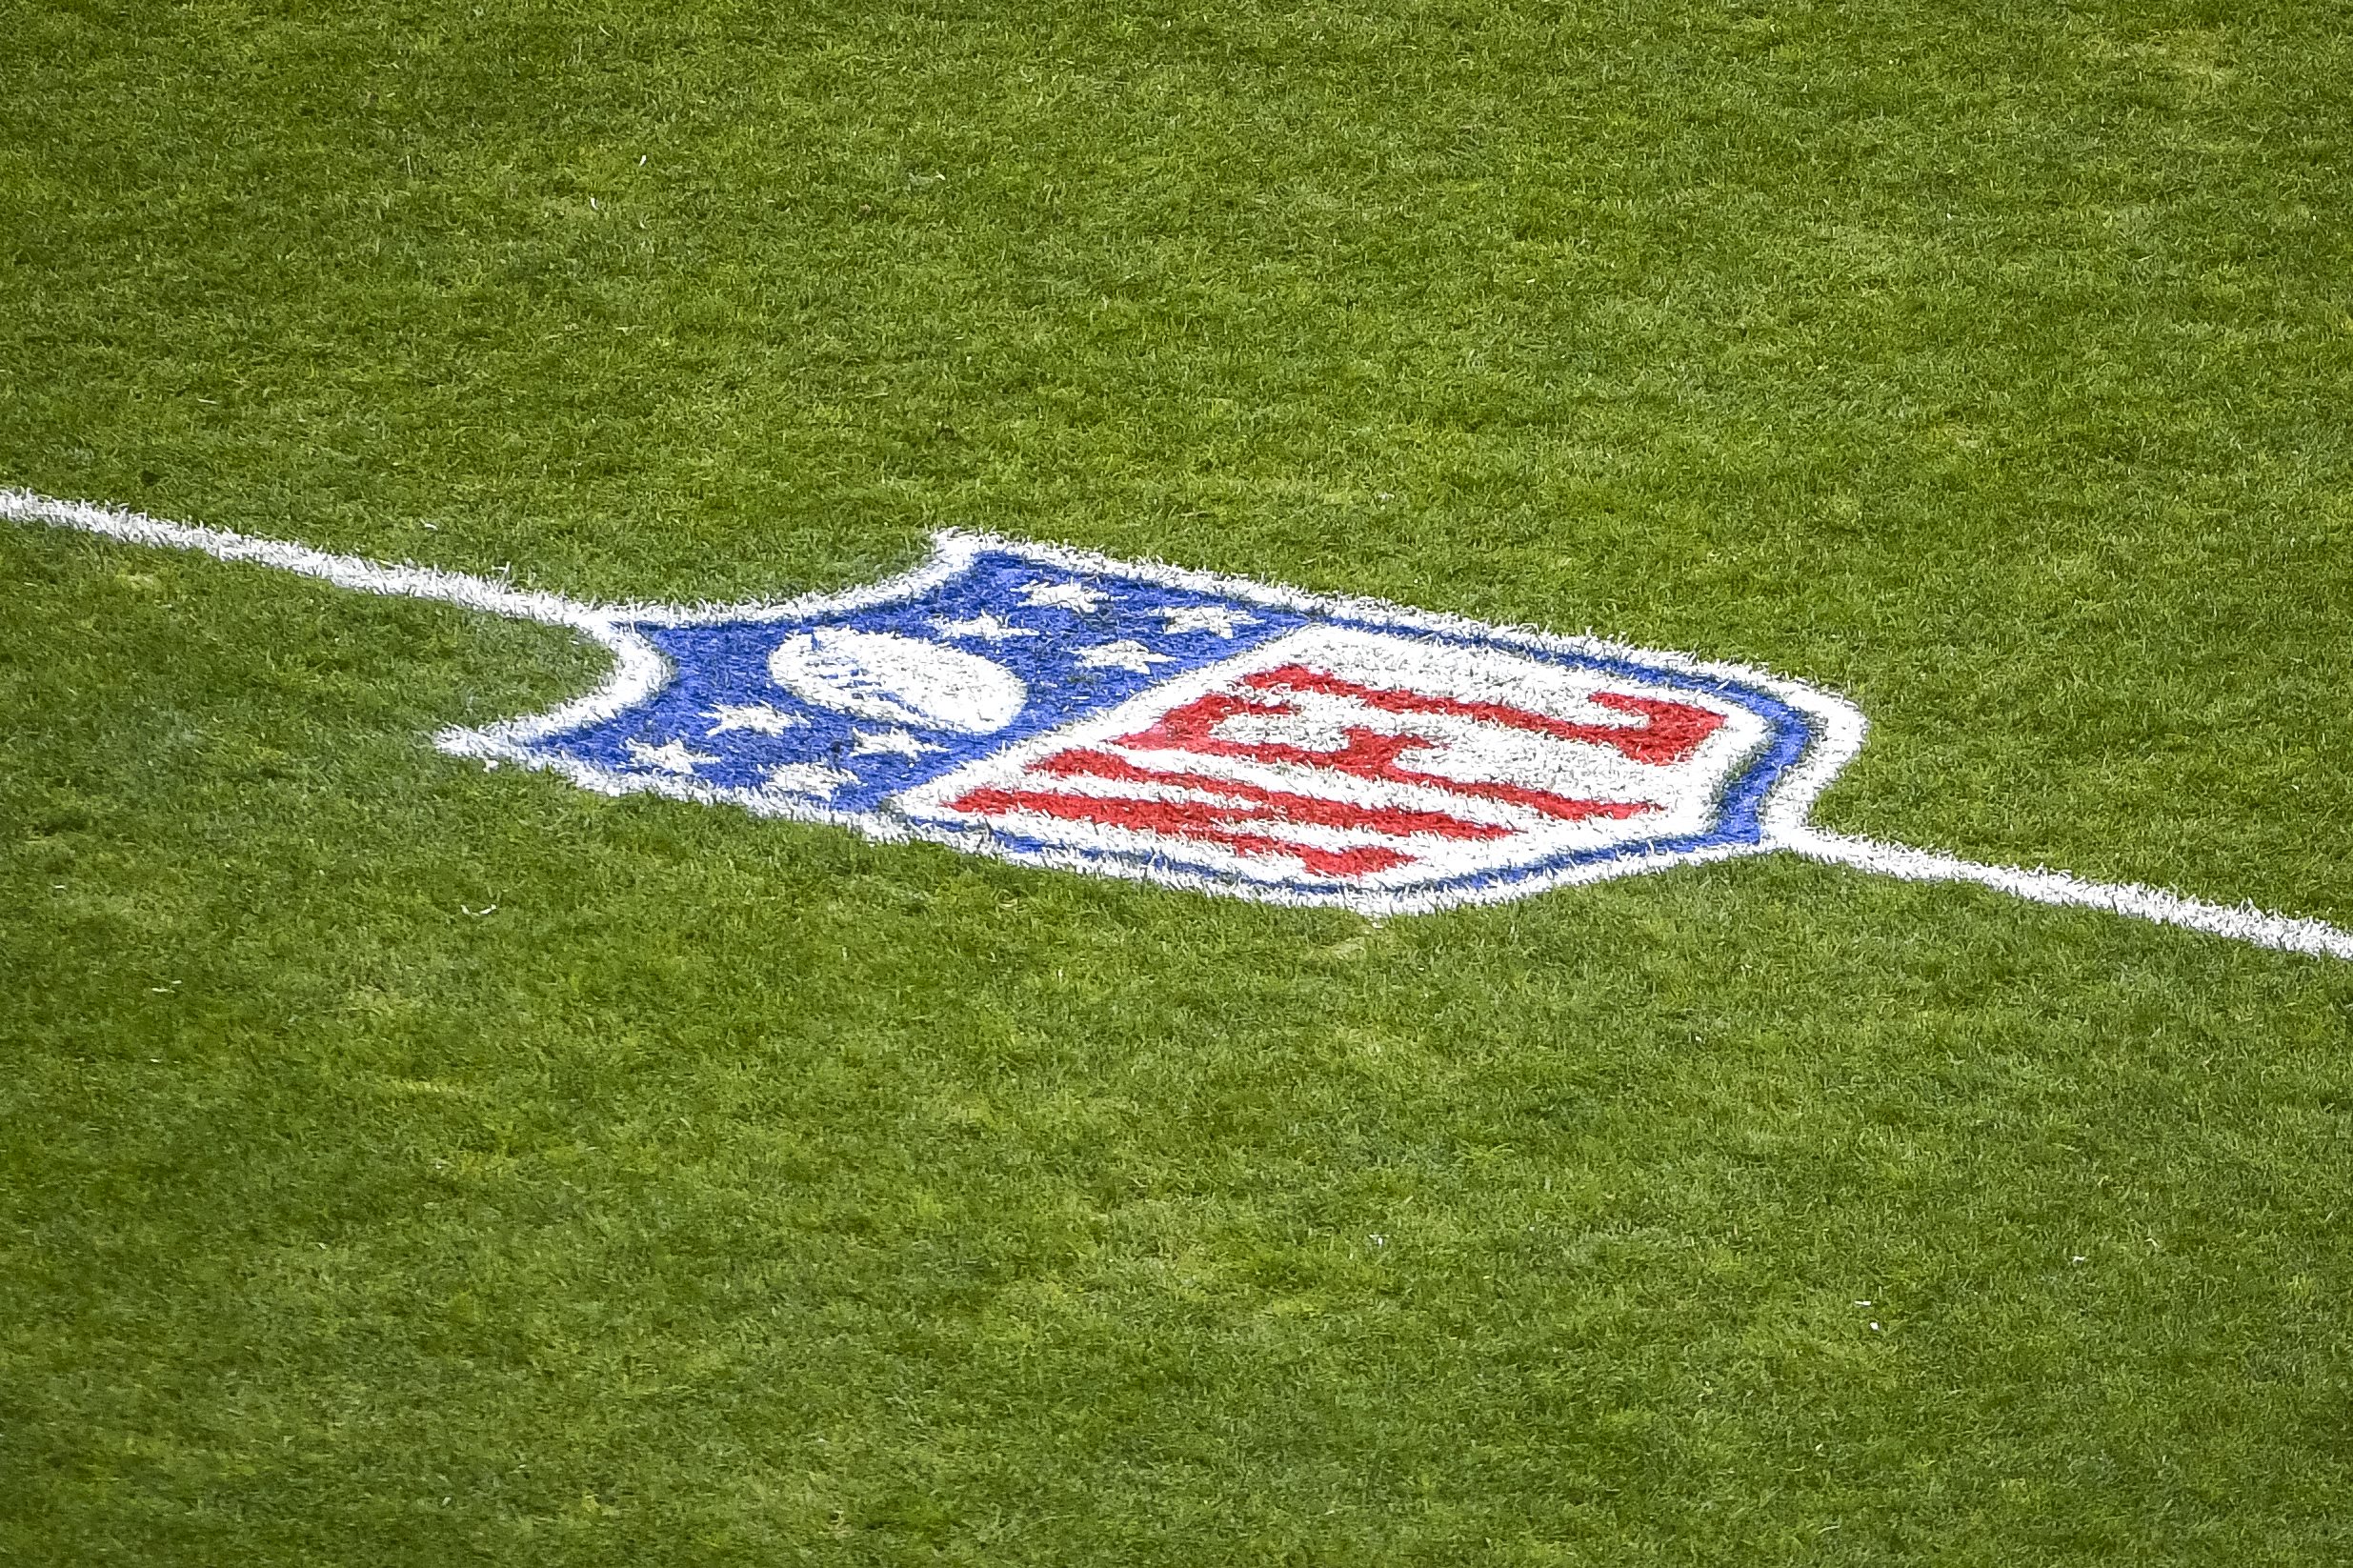 The NFL logo on the field.